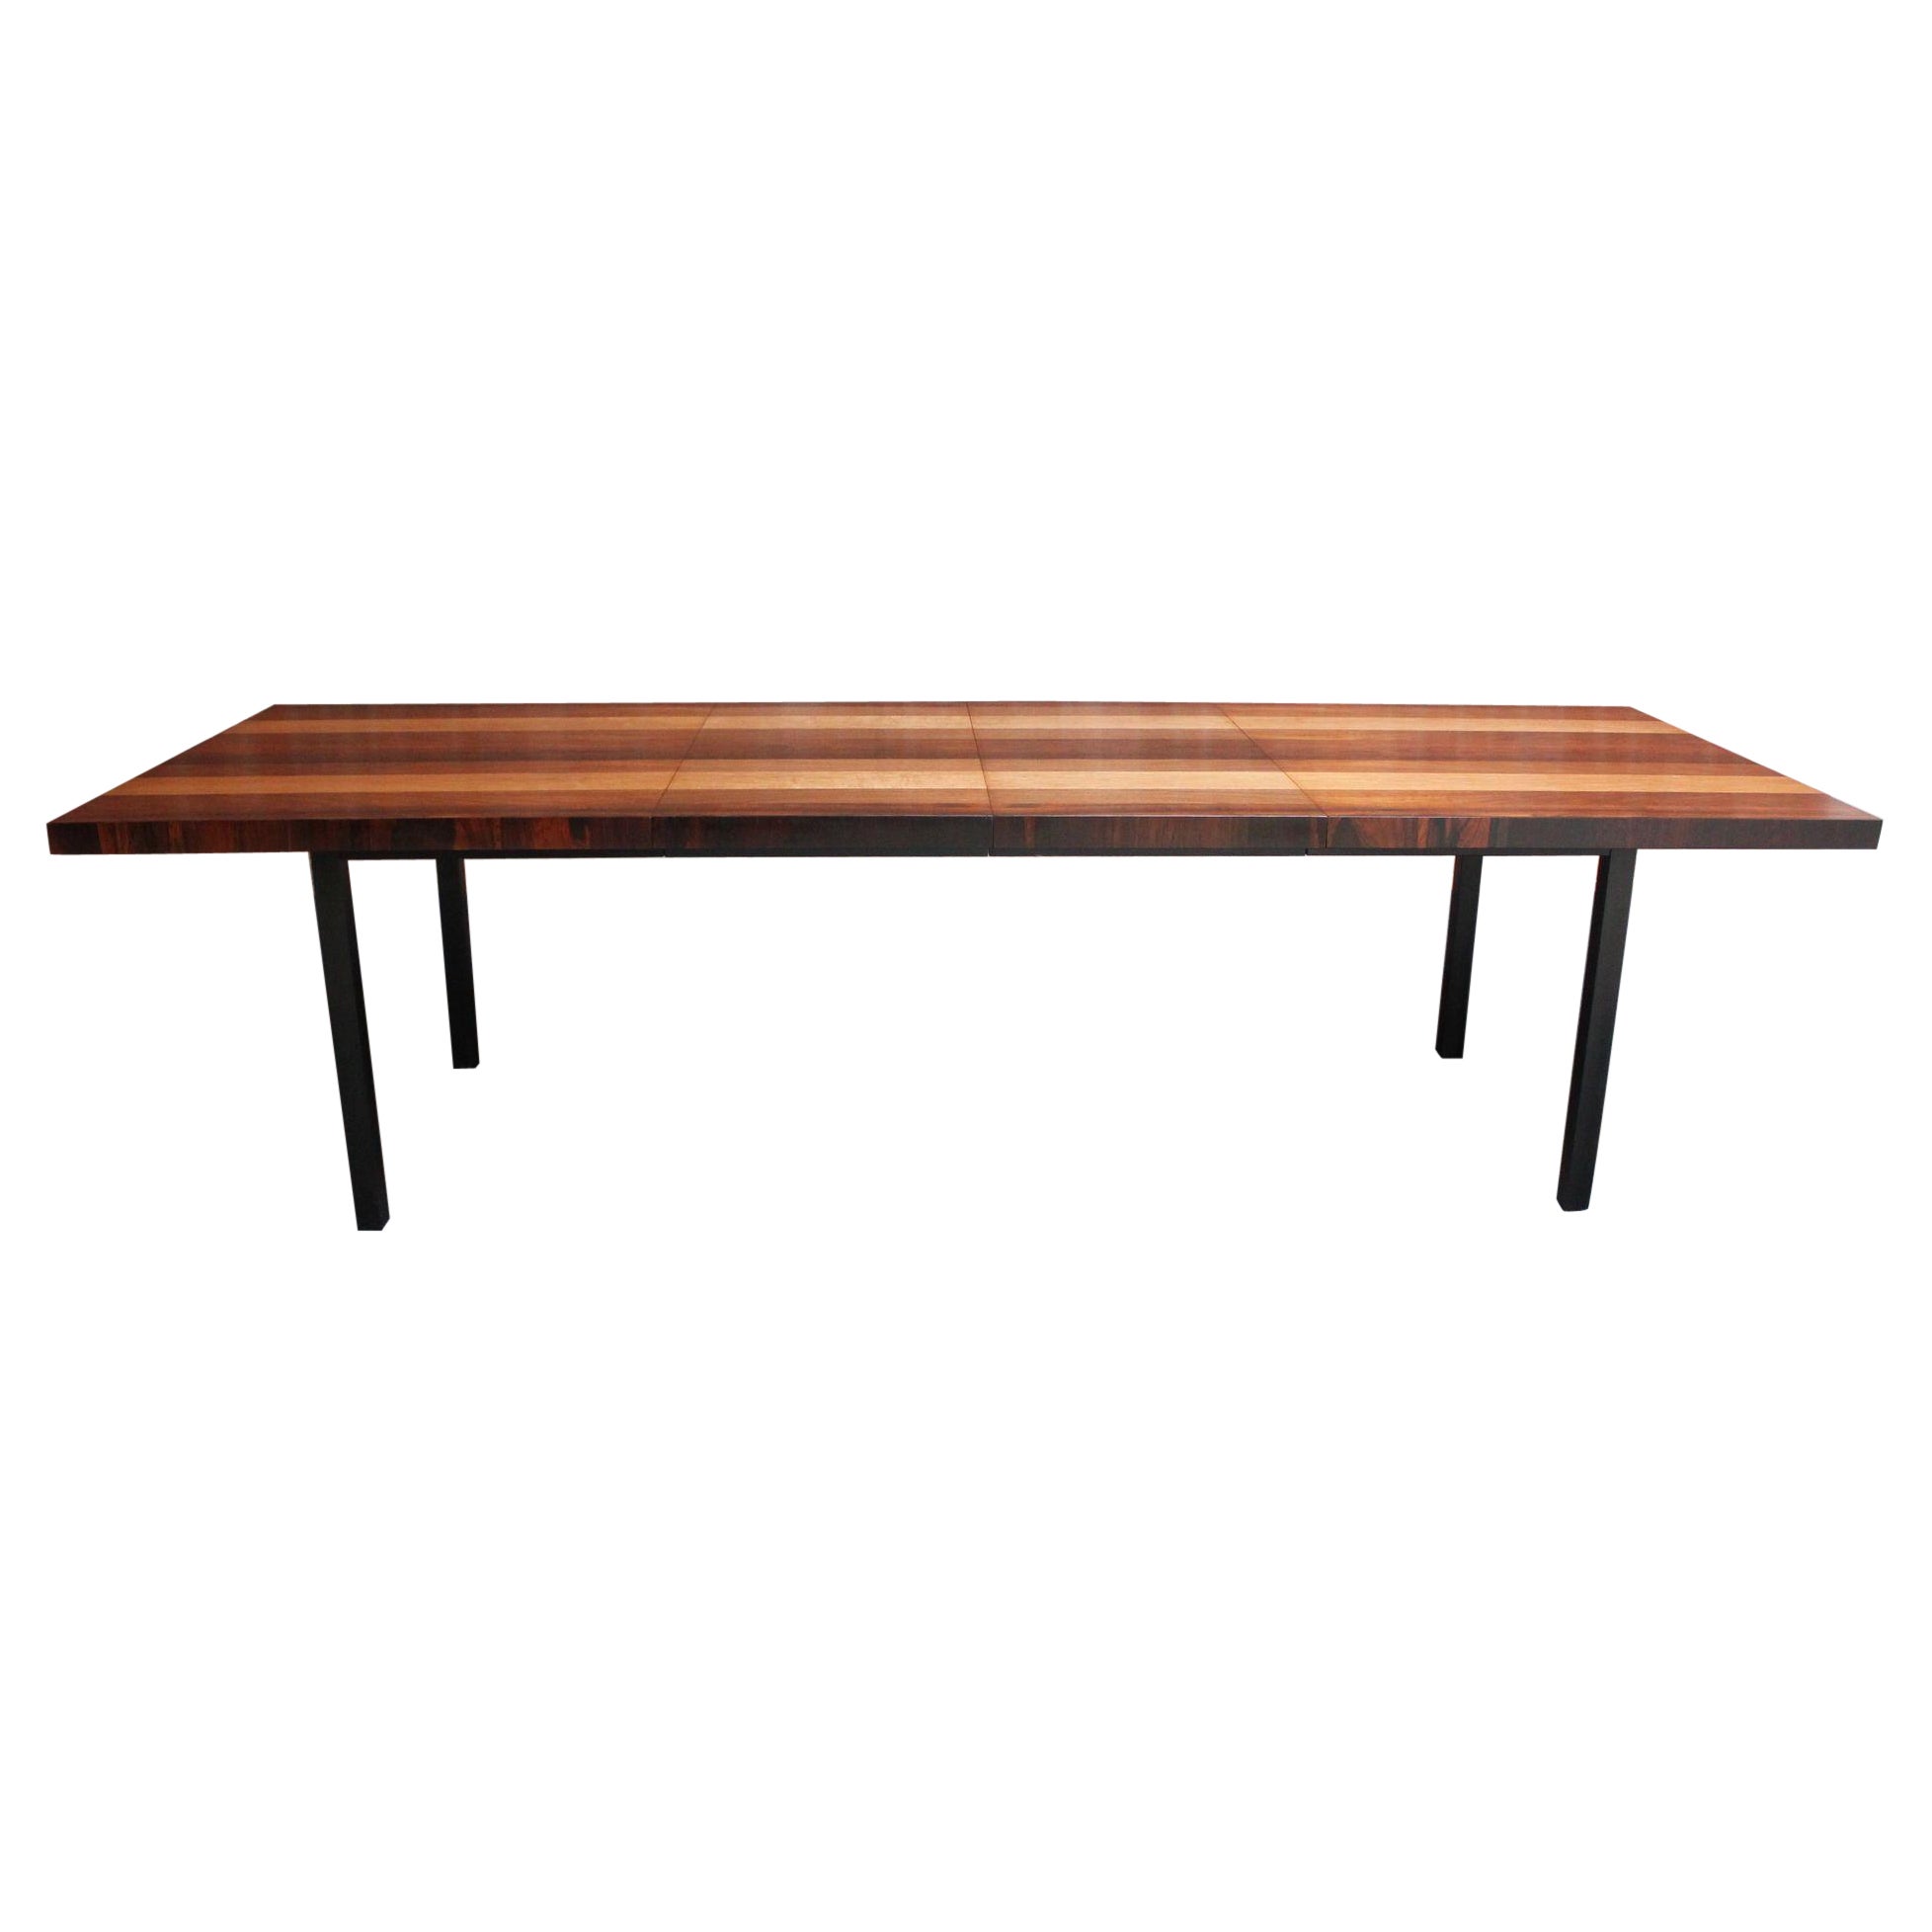 Mixed-Woods "Gallery One" Dining Table by Milo Baughman for Directional For Sale